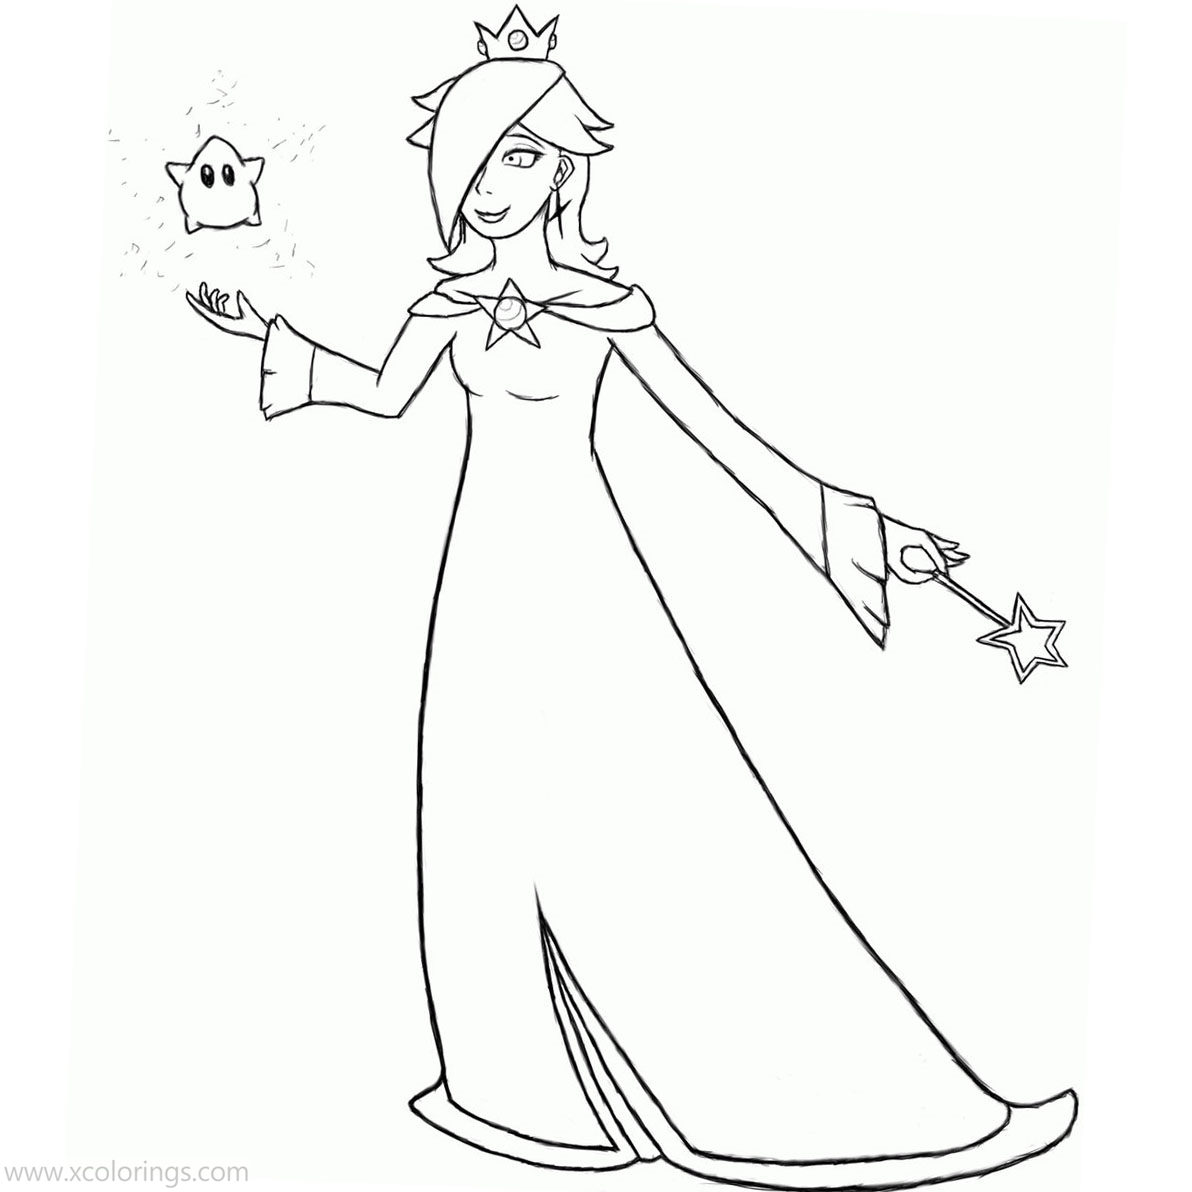 Free Rosalina and Luma Coloring Pages Lineart printable